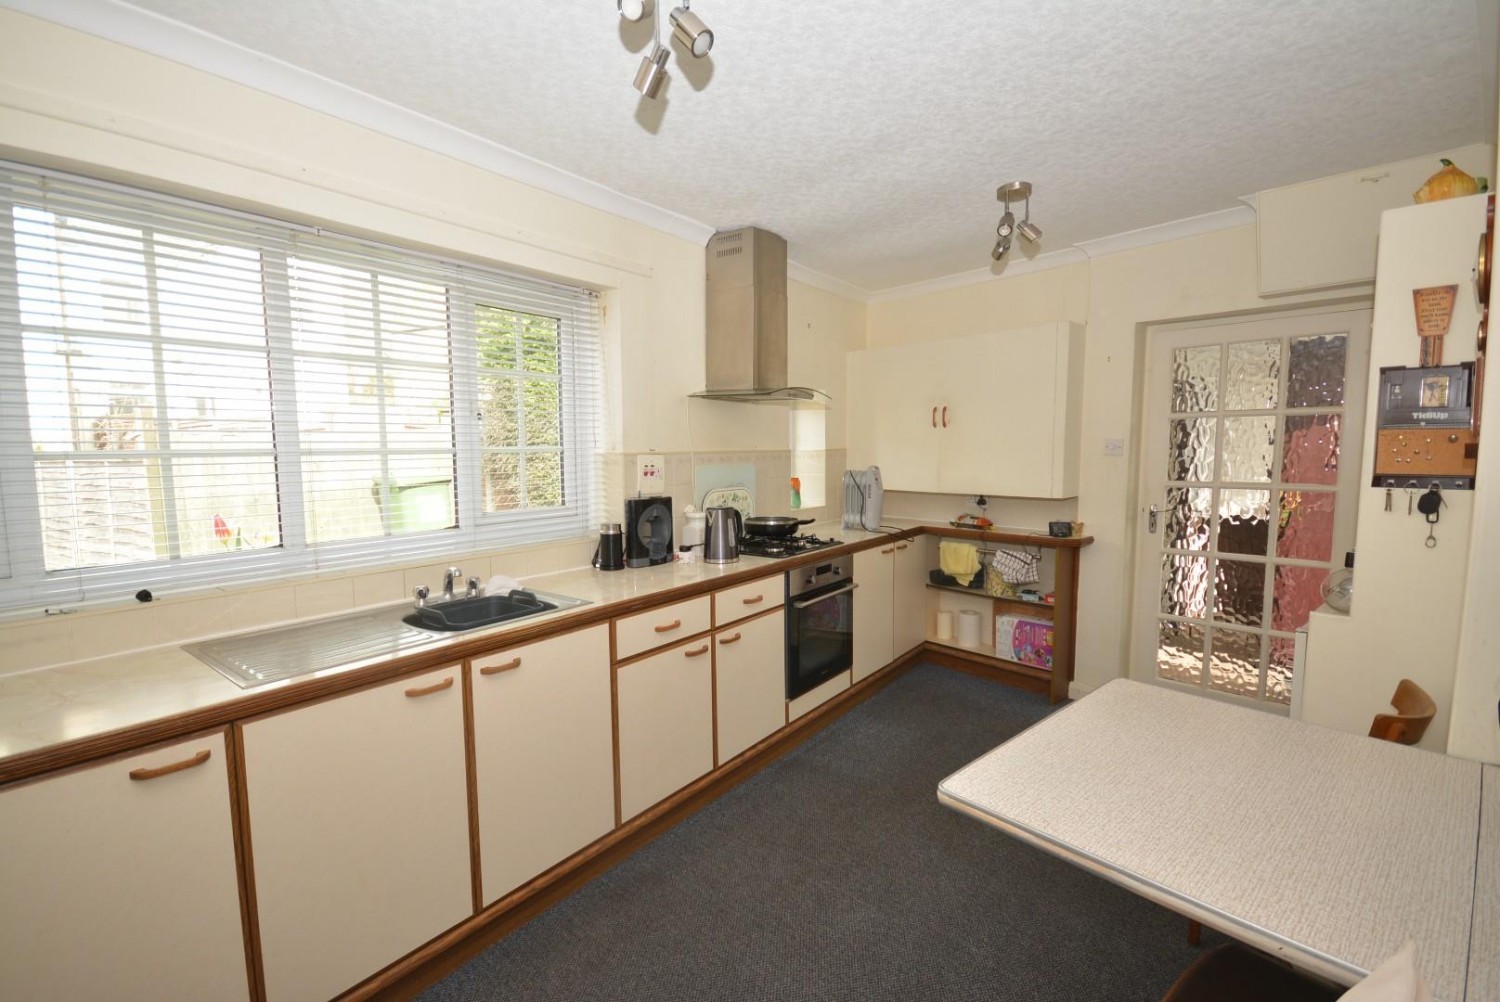 Chesterfield Road, Shuttlewood, Chesterfield, S44 6QL